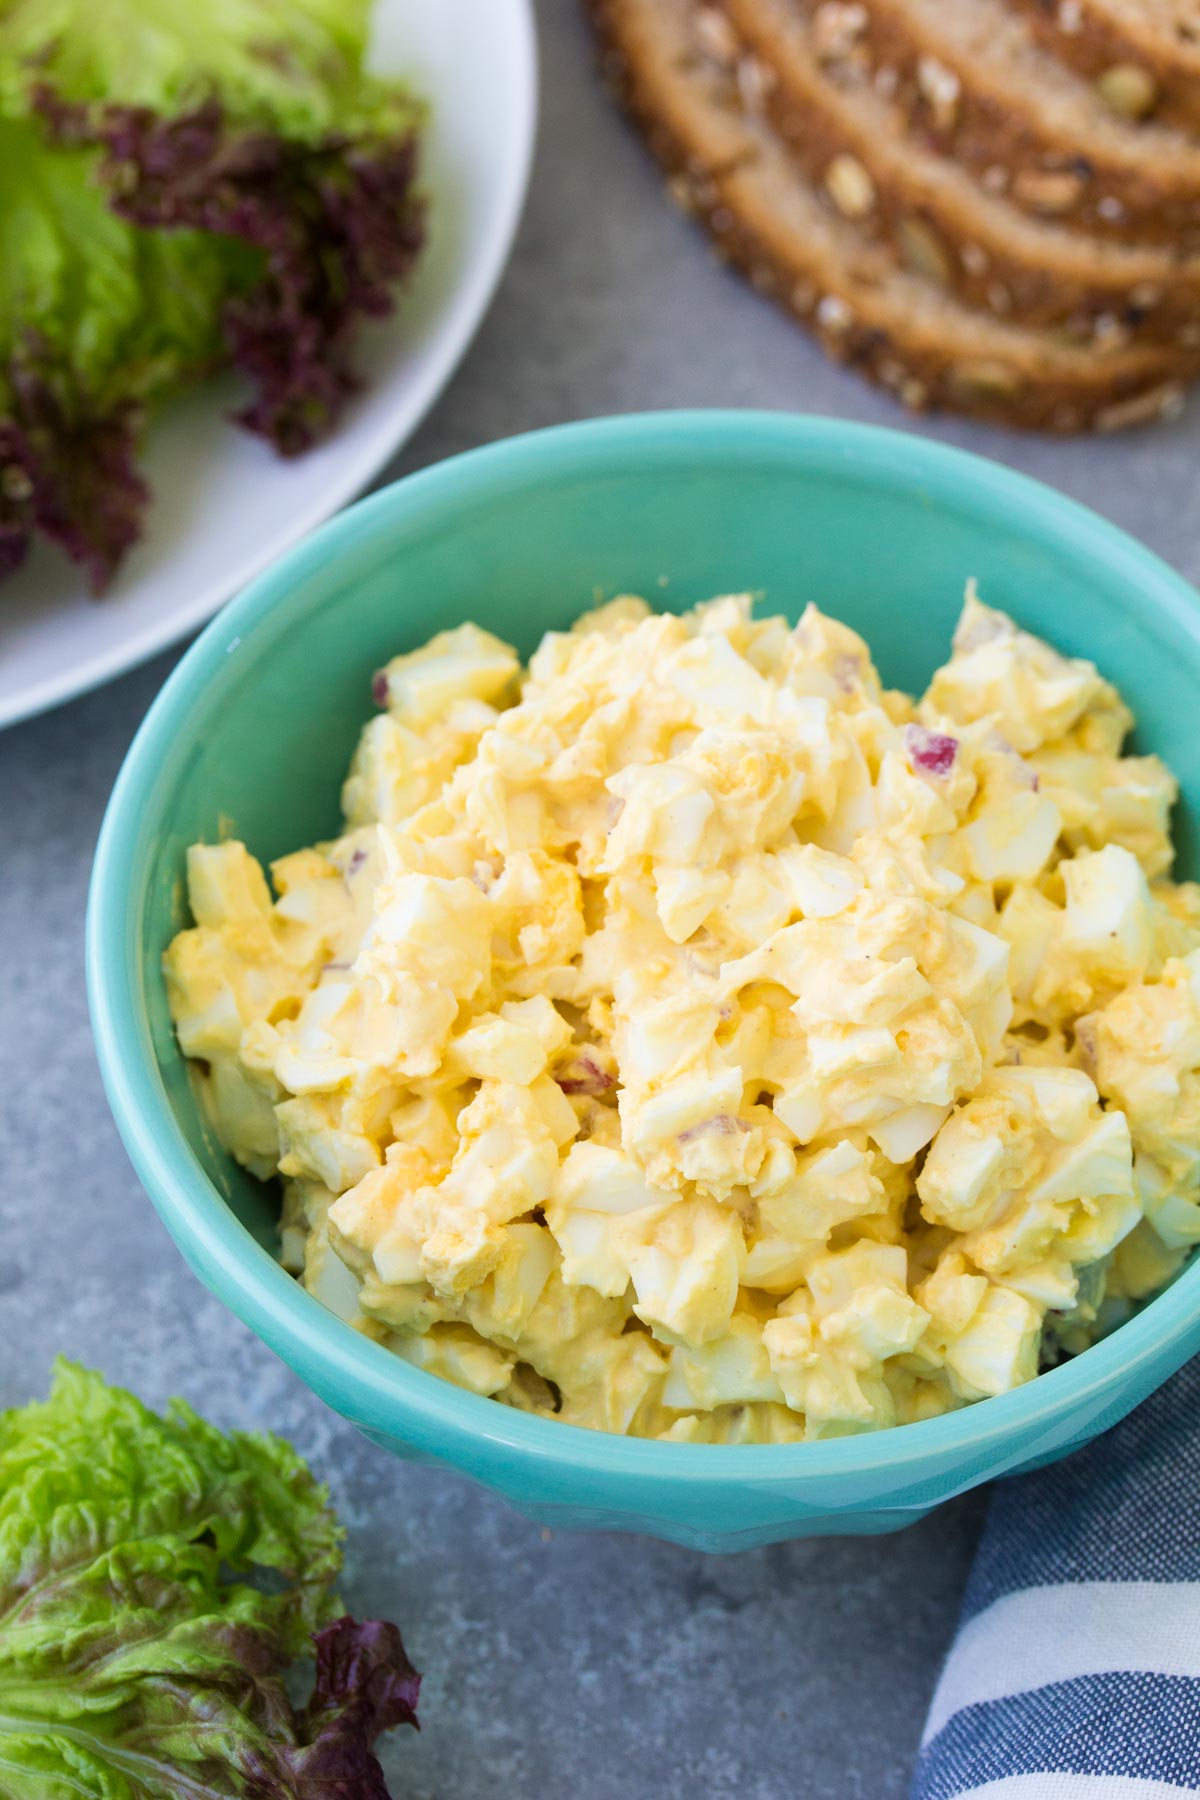 Egg salad in a bowl with lettuce and bread slices in the background.